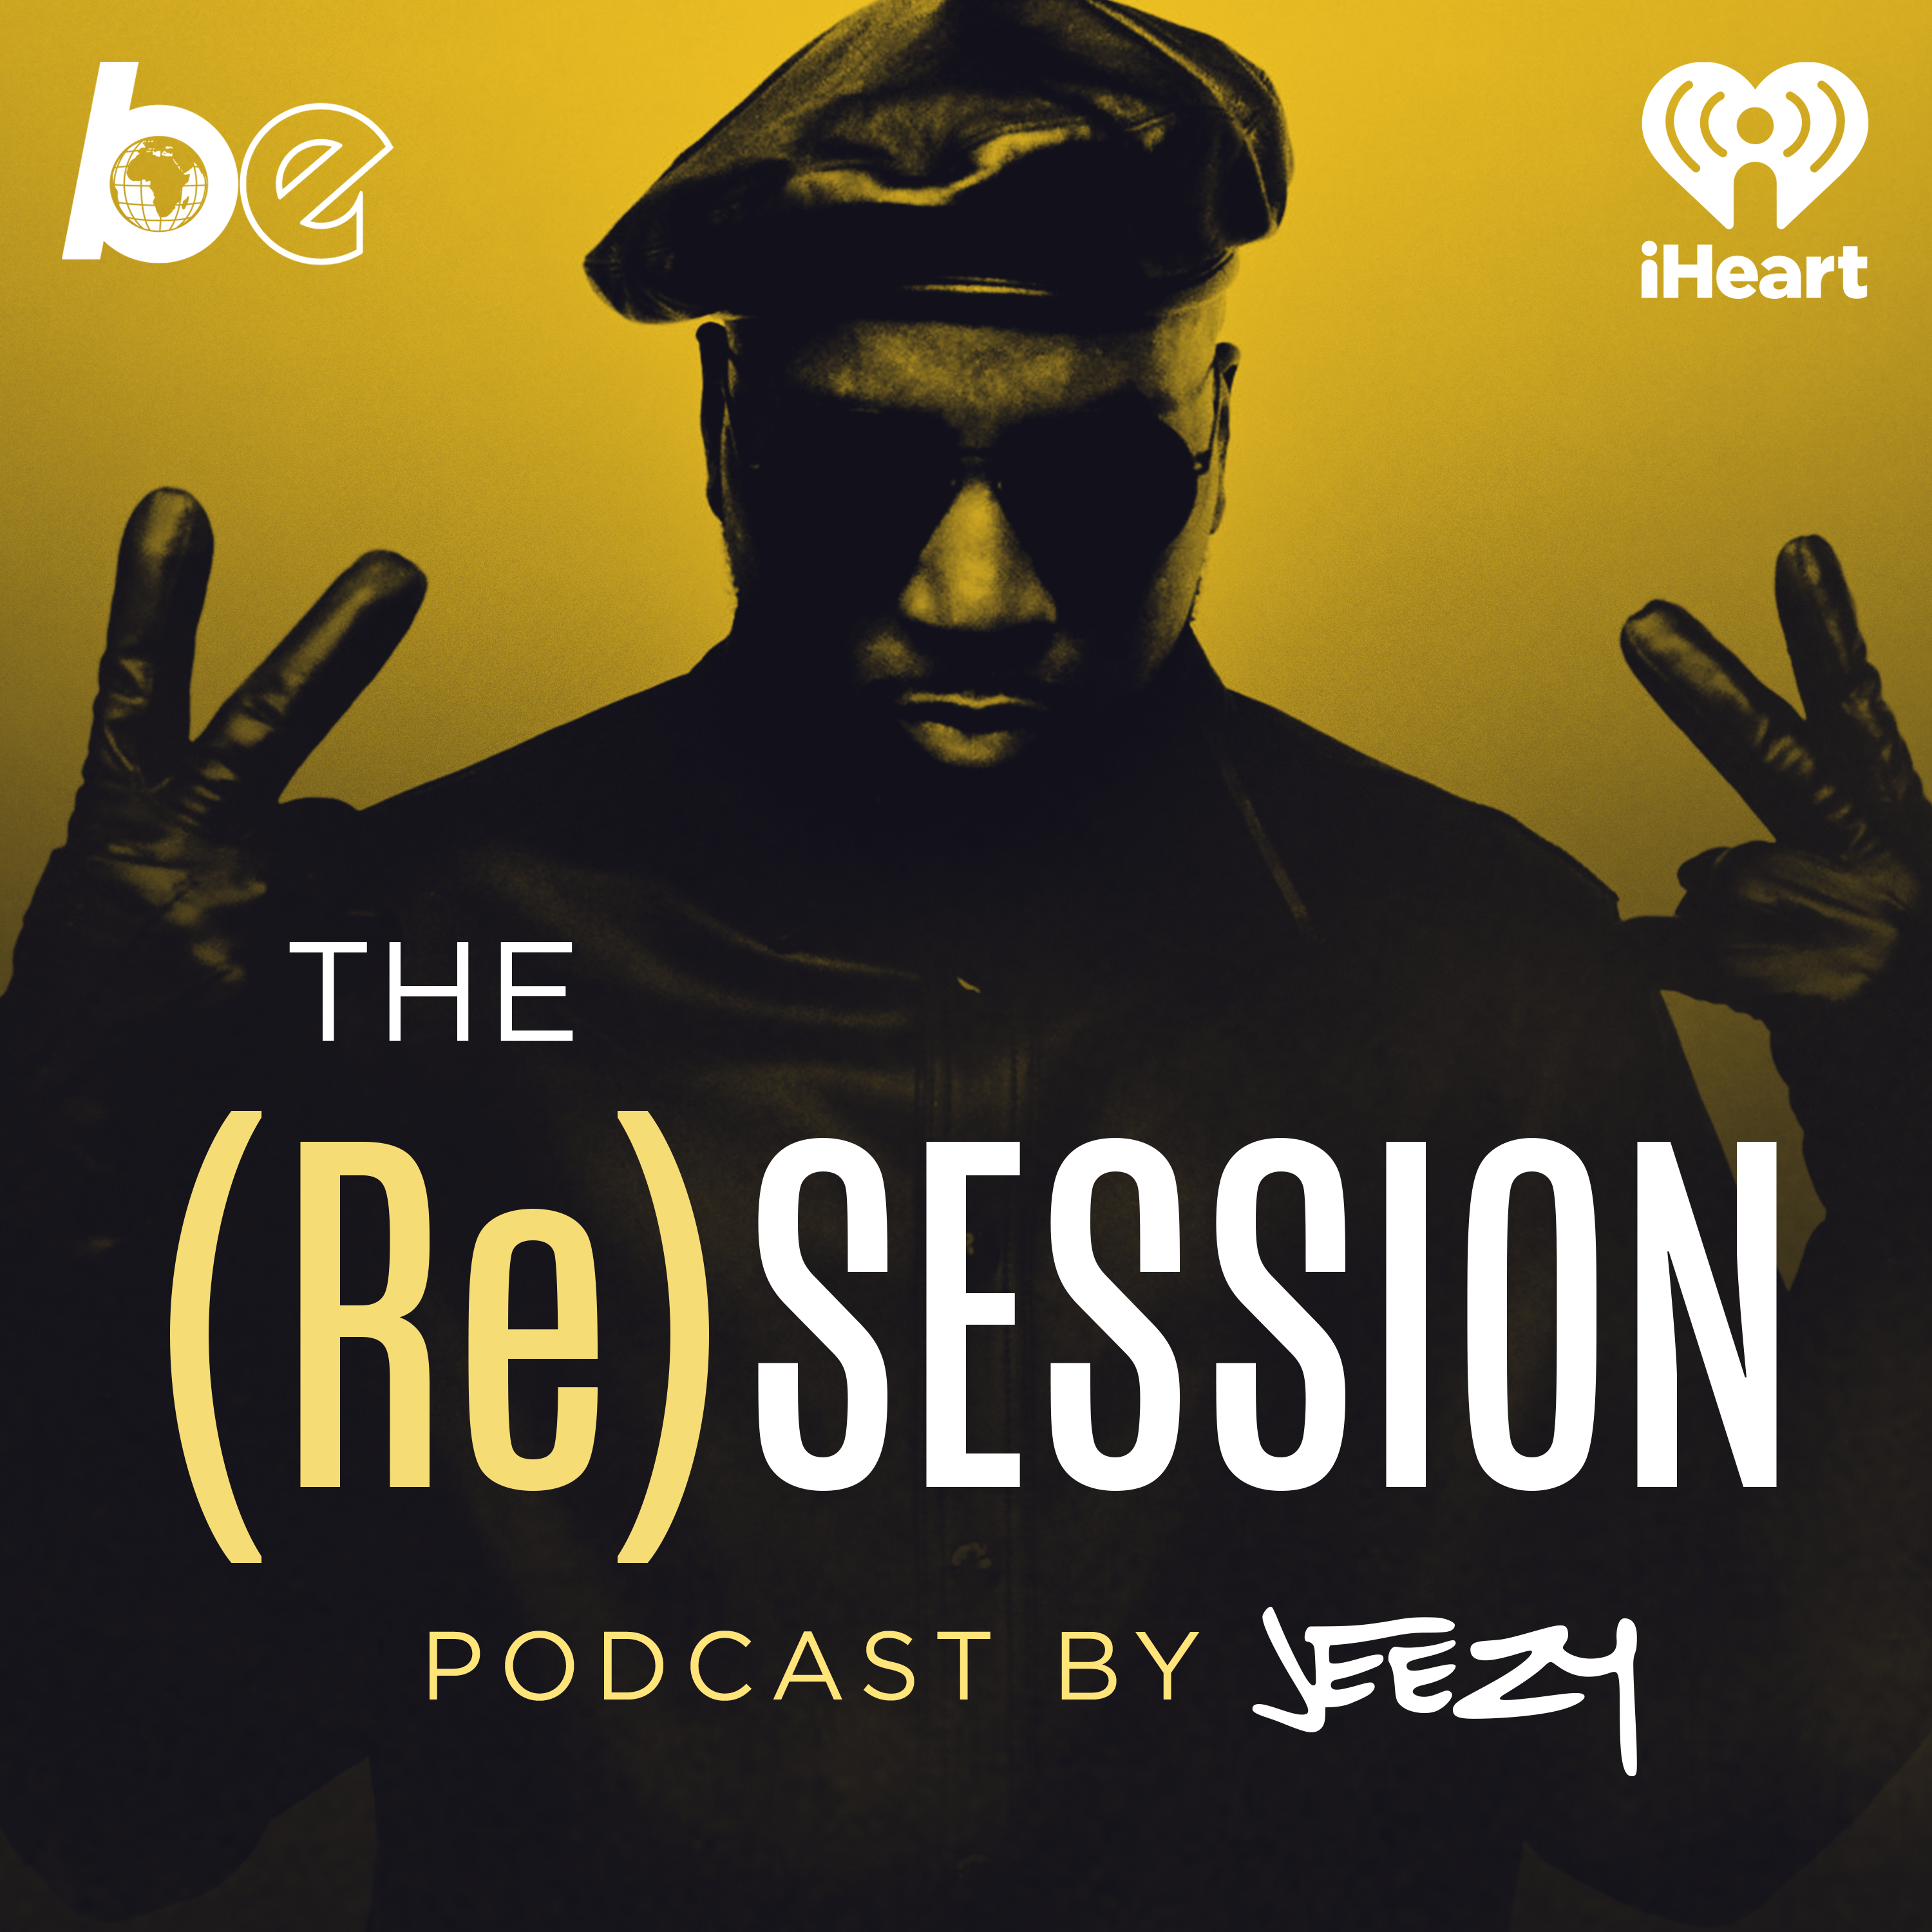 Demi Lovato | Ep 5 | (Re)Session Podcast by Jeezy